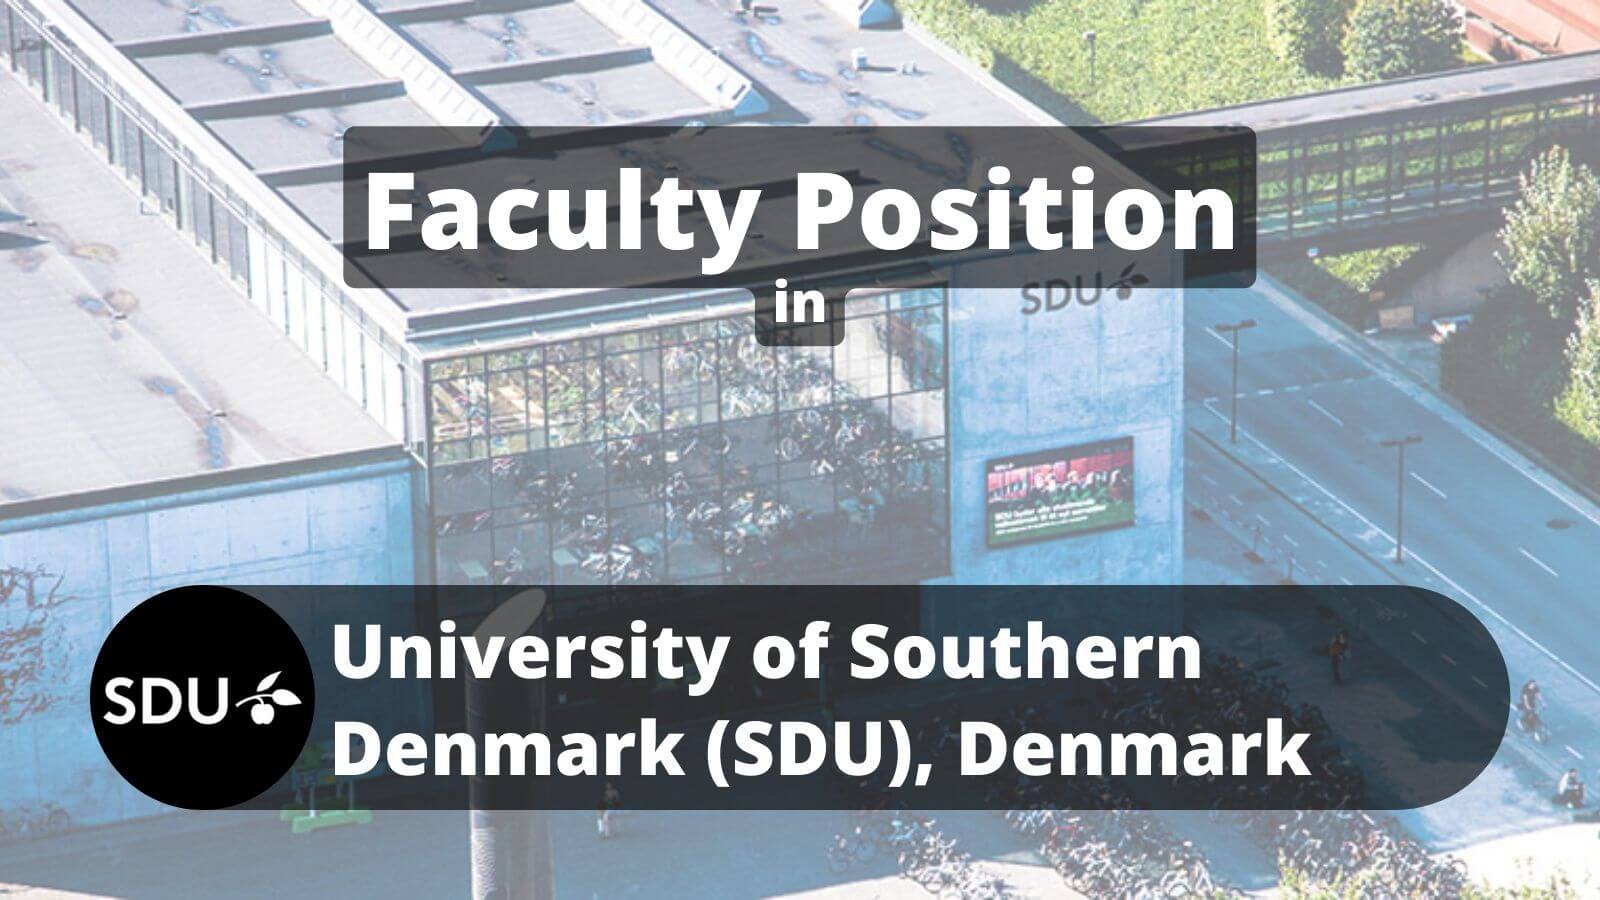 Faculty Position in SDU University of Southern Denmark